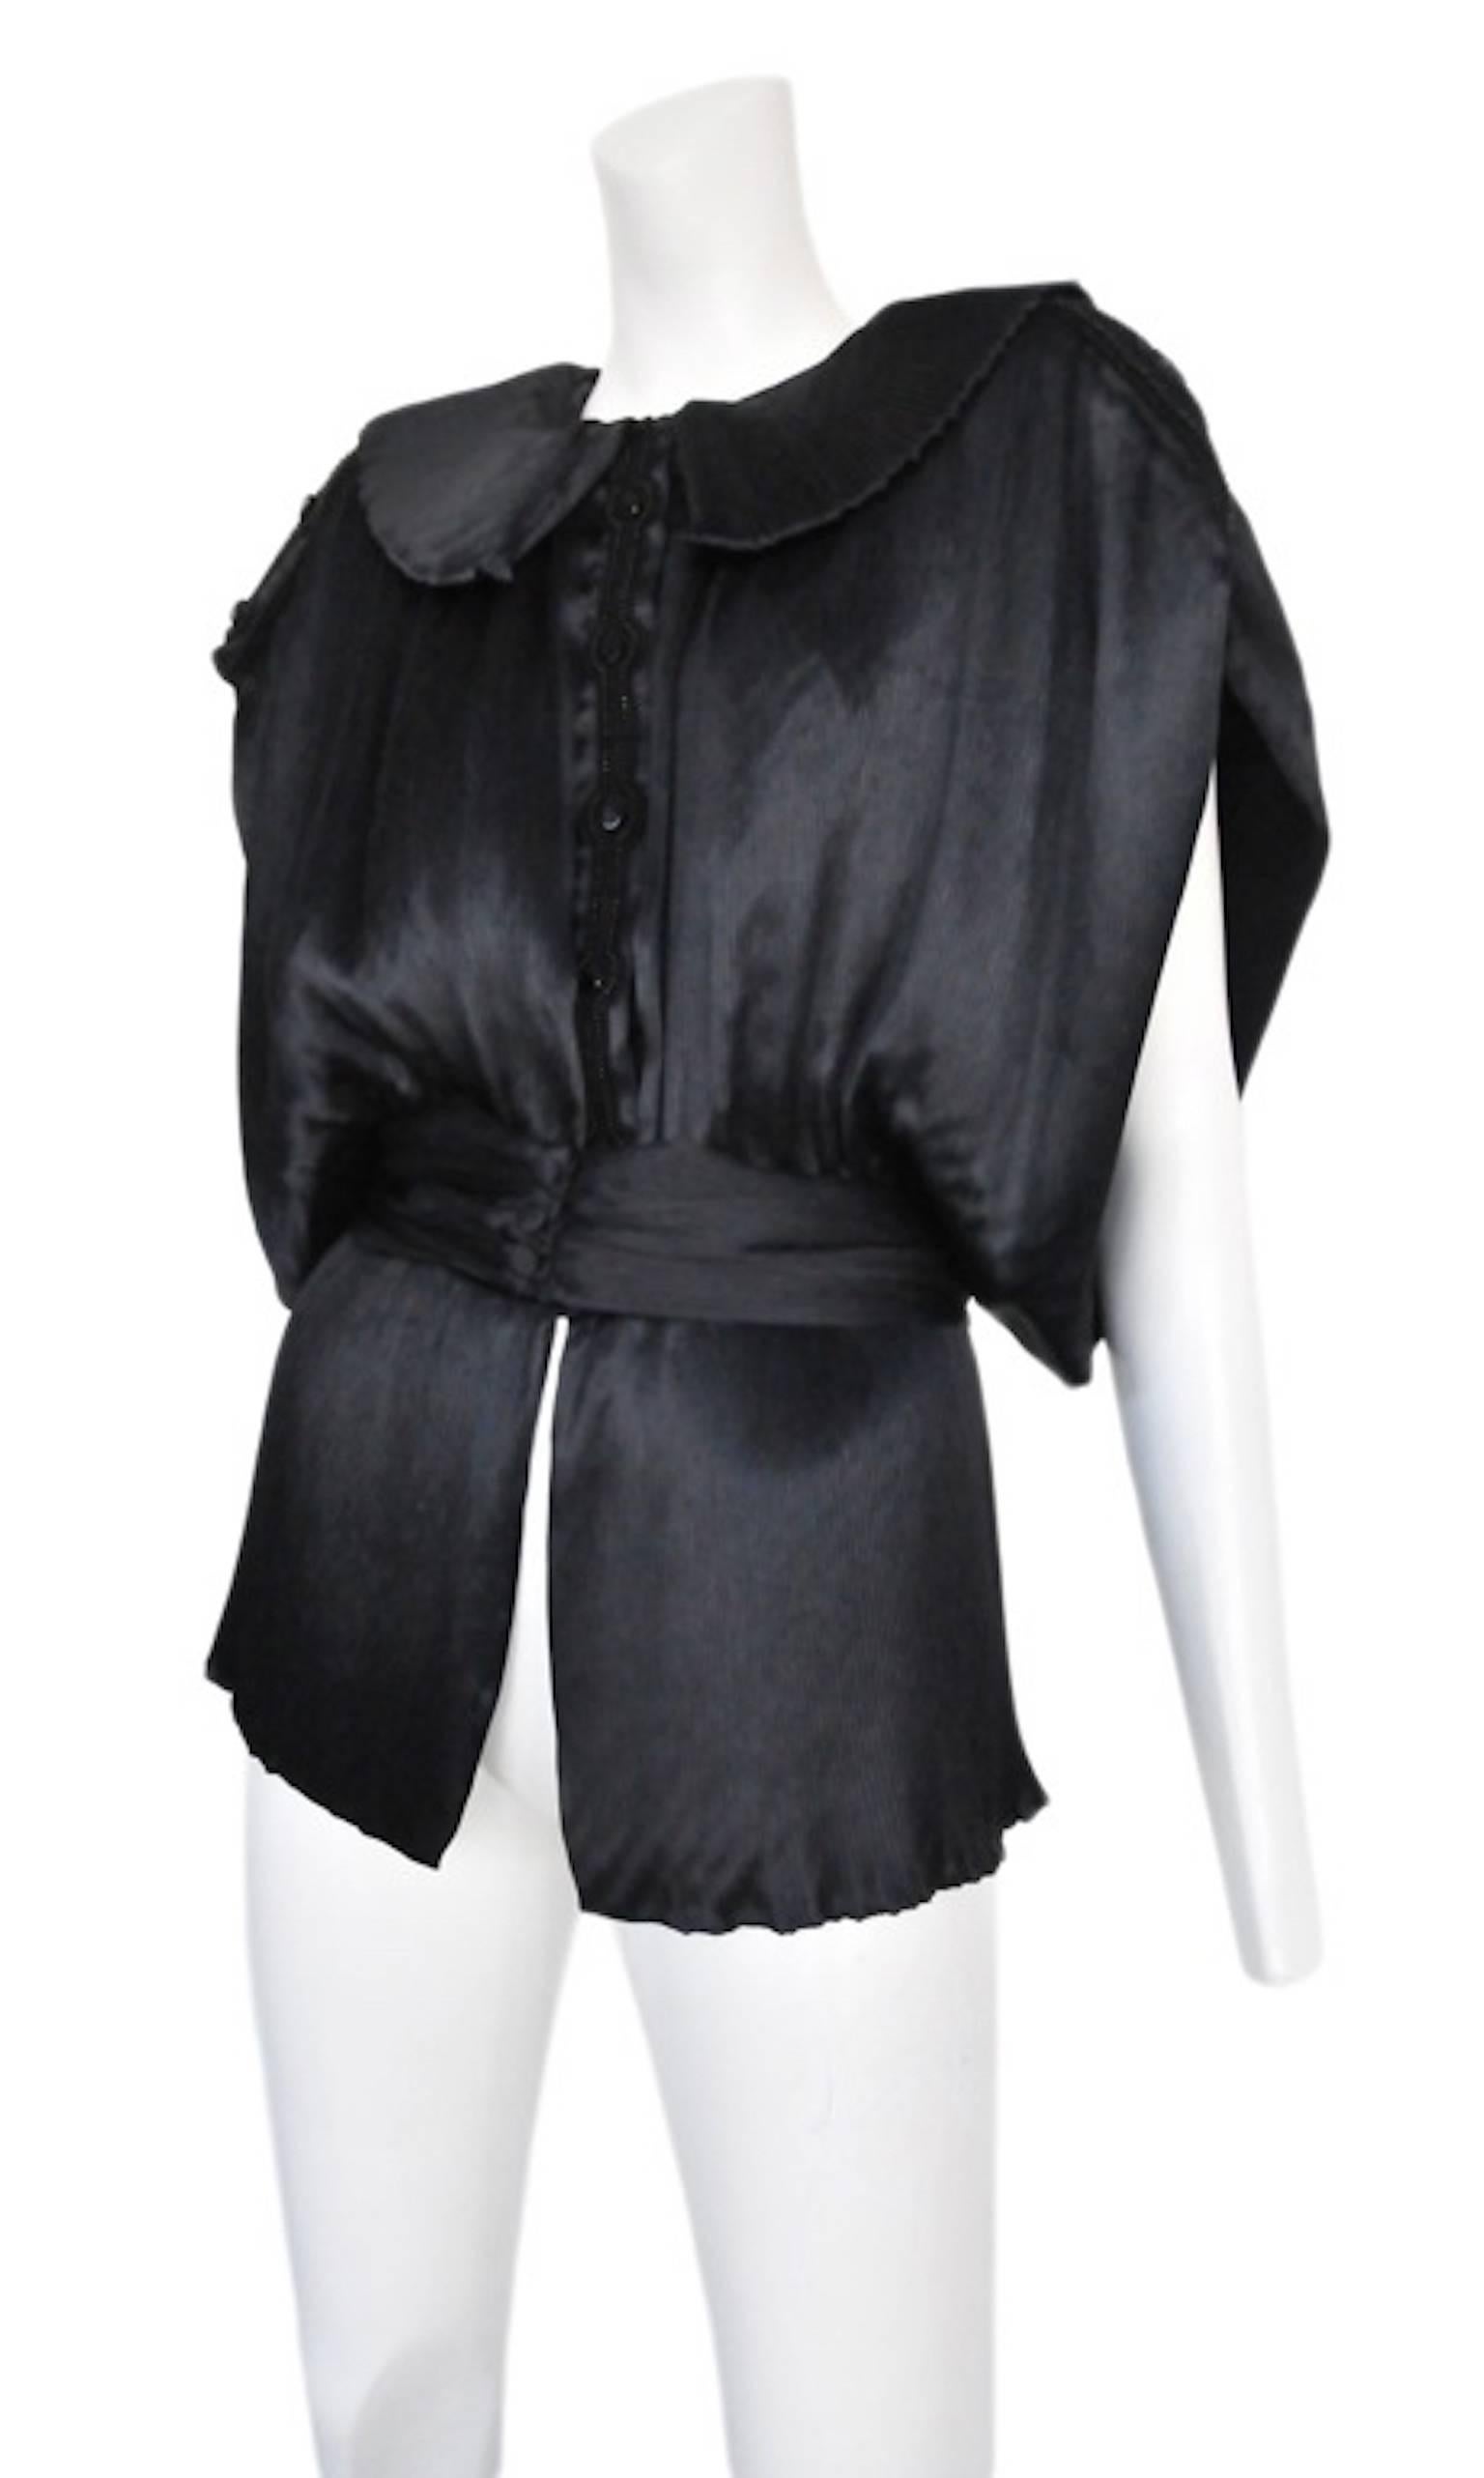 Black satin button down kimono inspired blouse with large round-cornered collar, waistband, and subtle pleated detail. Circa 1987.
Please inquire for additional images.